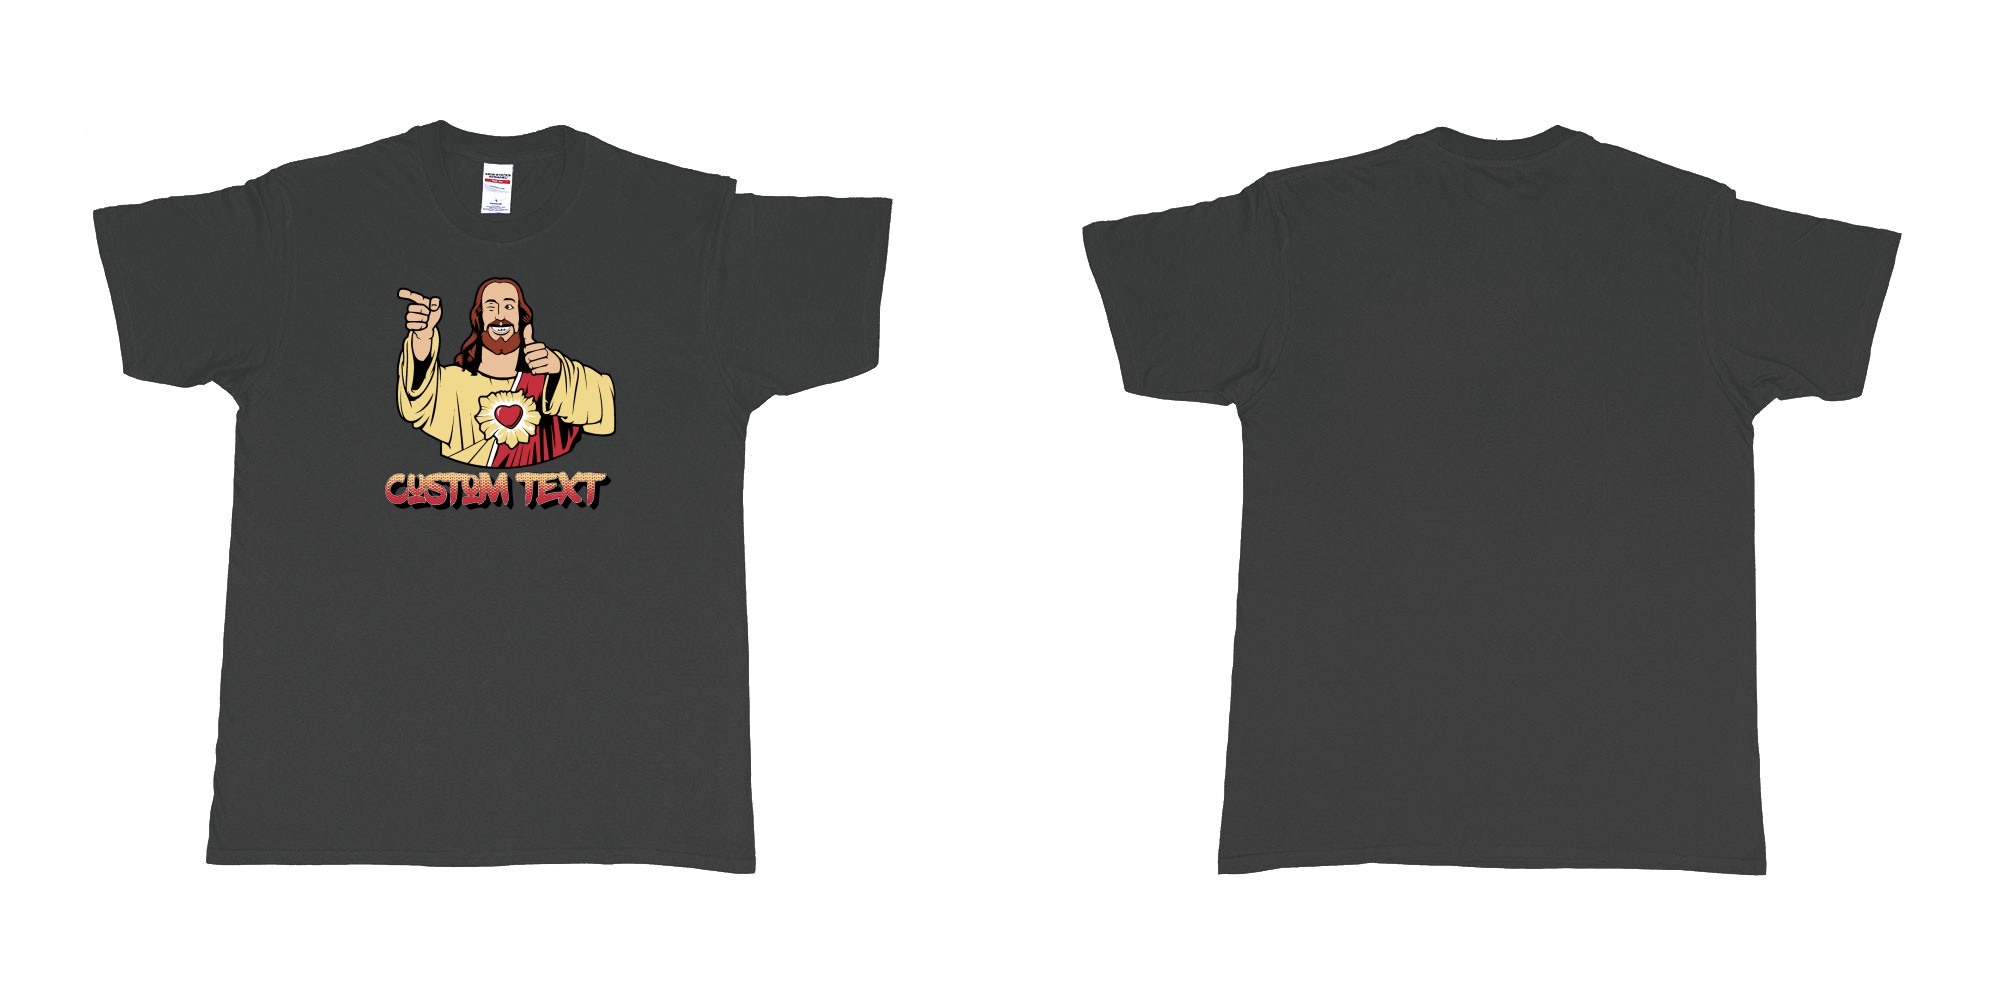 Custom tshirt design buddy christ custom text in fabric color black choice your own text made in Bali by The Pirate Way